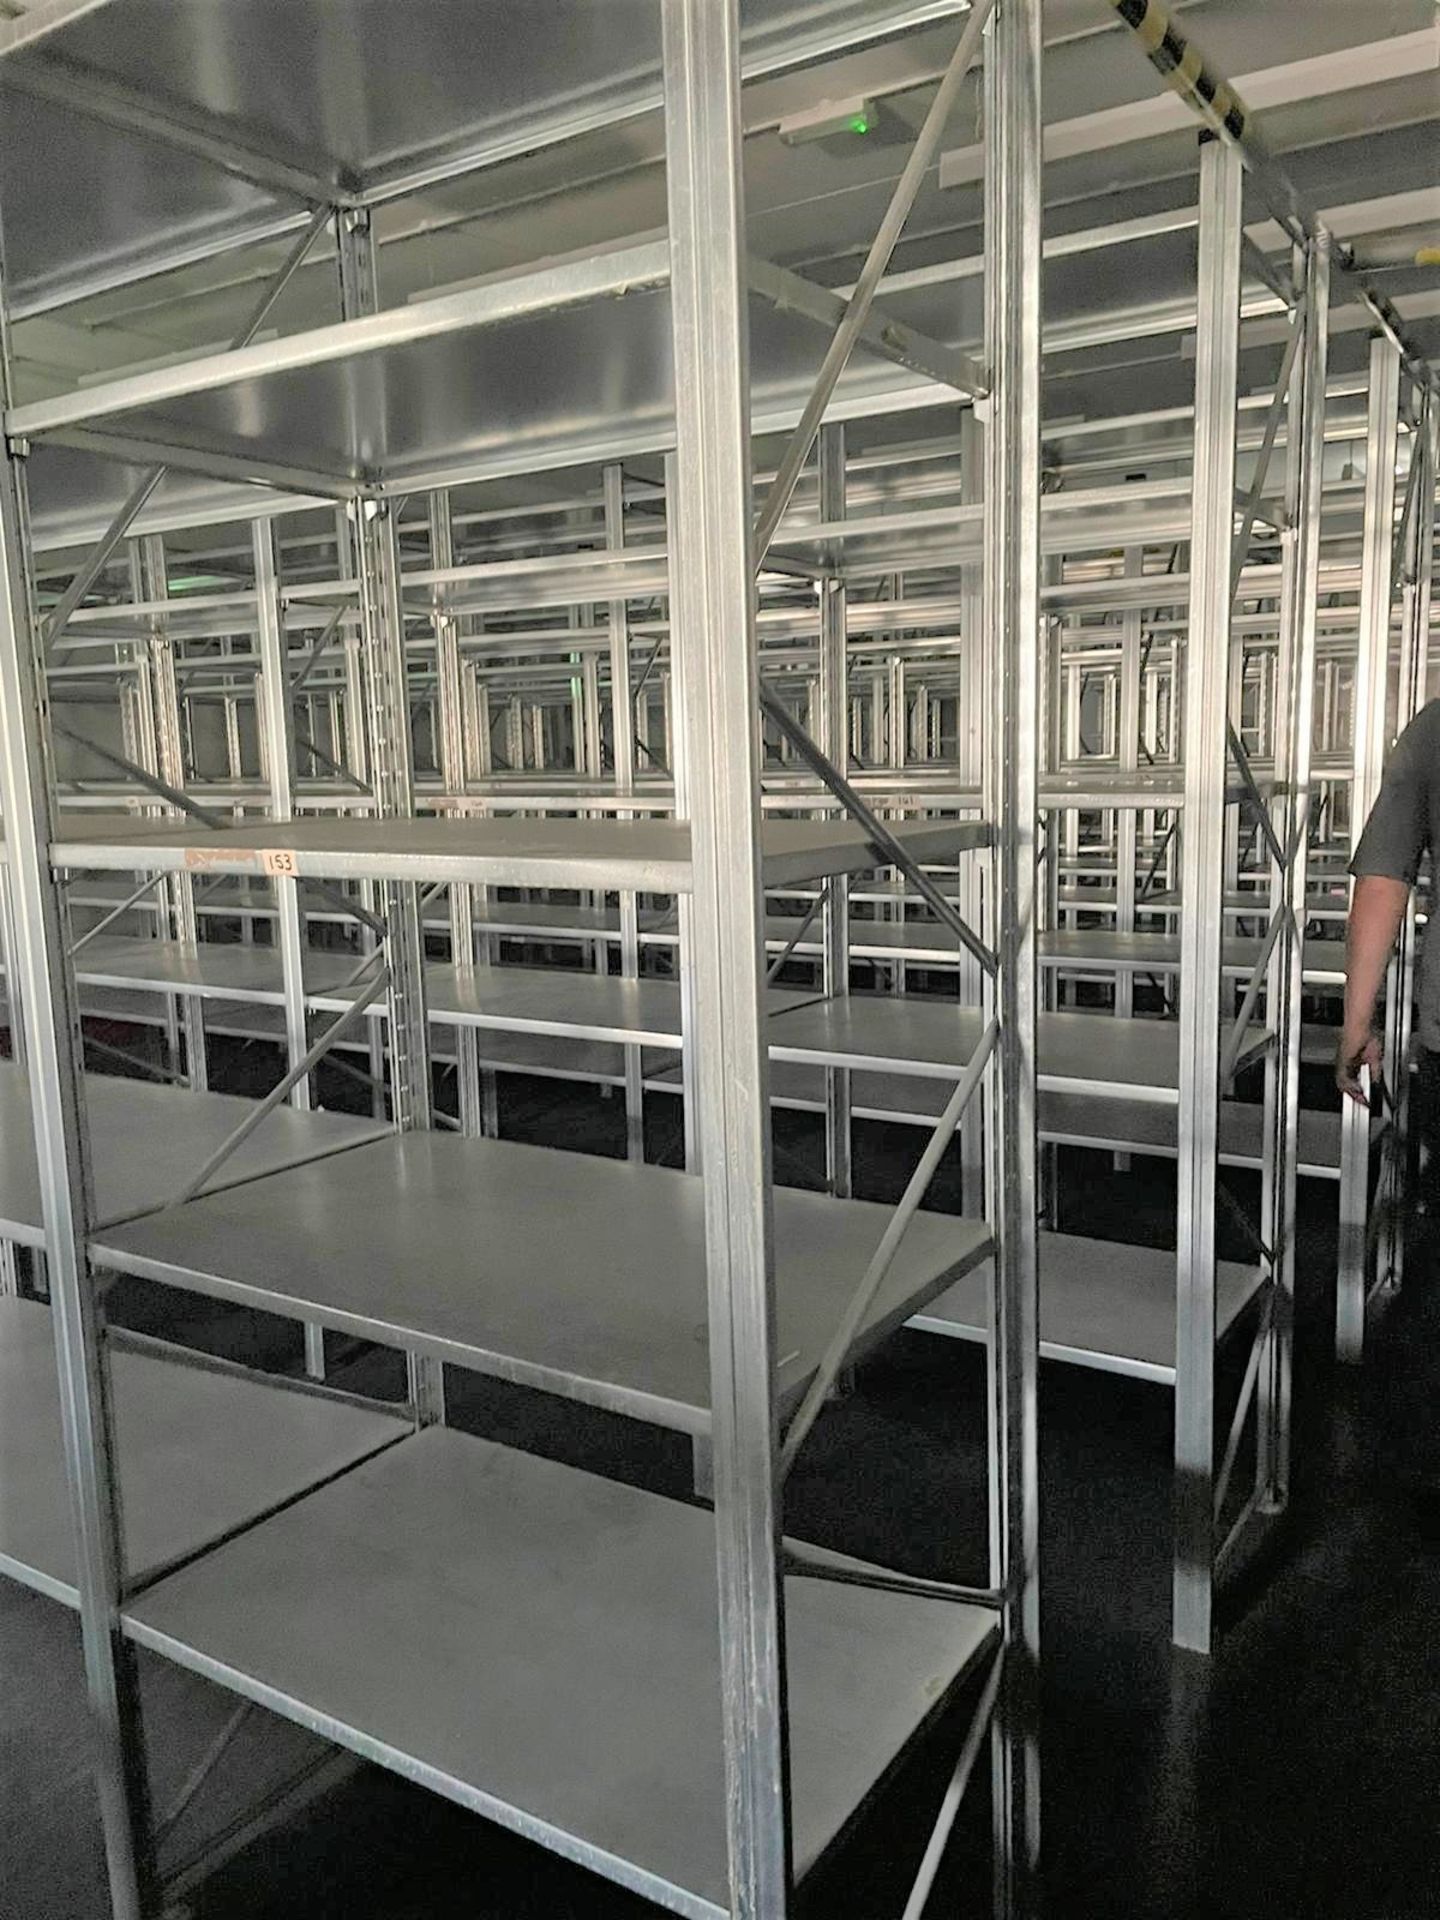 12 x Bays of High Quality Galvanised Steel Warehouse Shelving - Bay Dimensions: H250 x W100 x D60 - Image 9 of 12